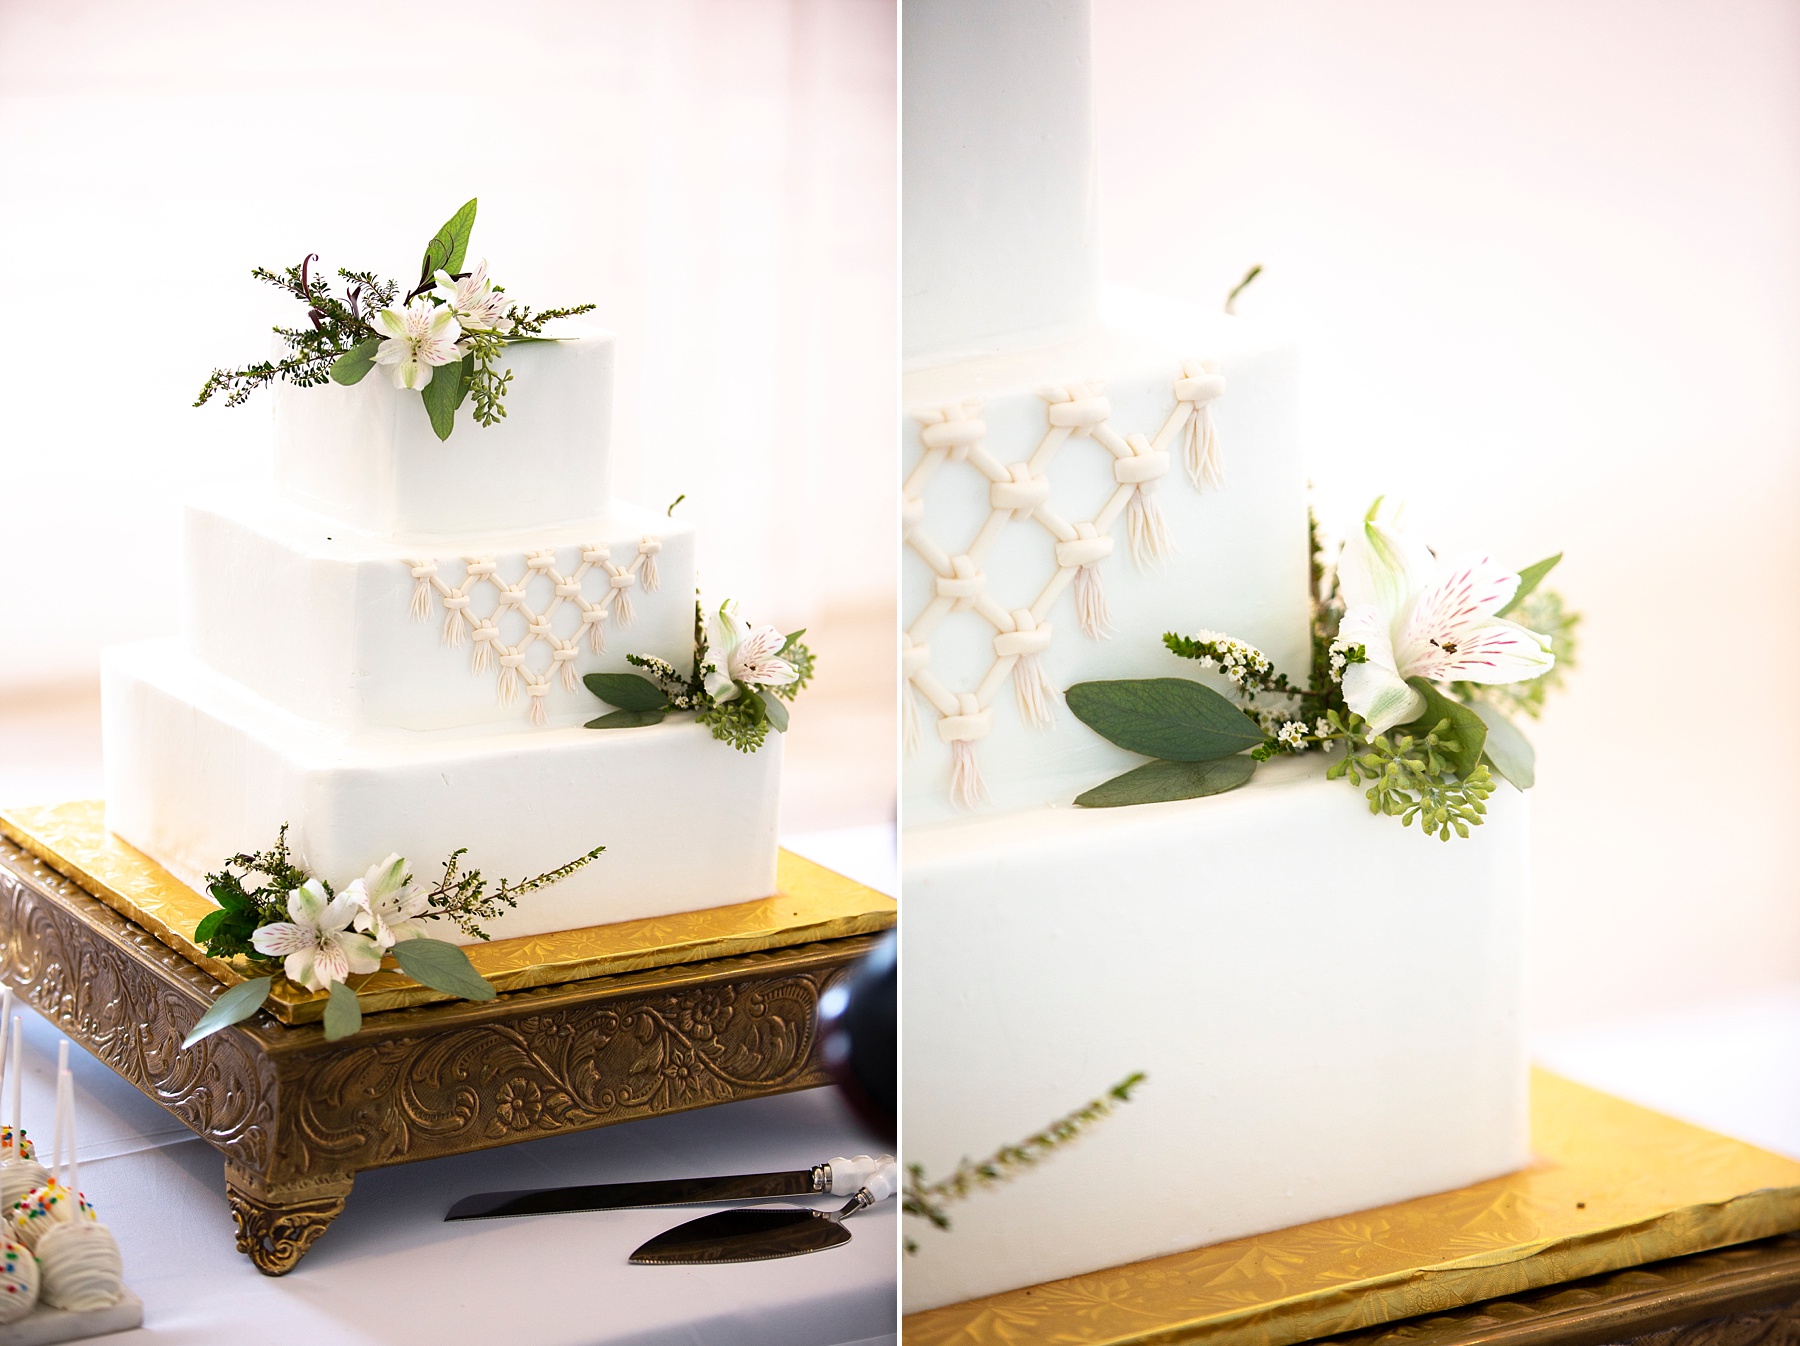 three tiered wedding cake with macrame details photographed by Randi Michelle